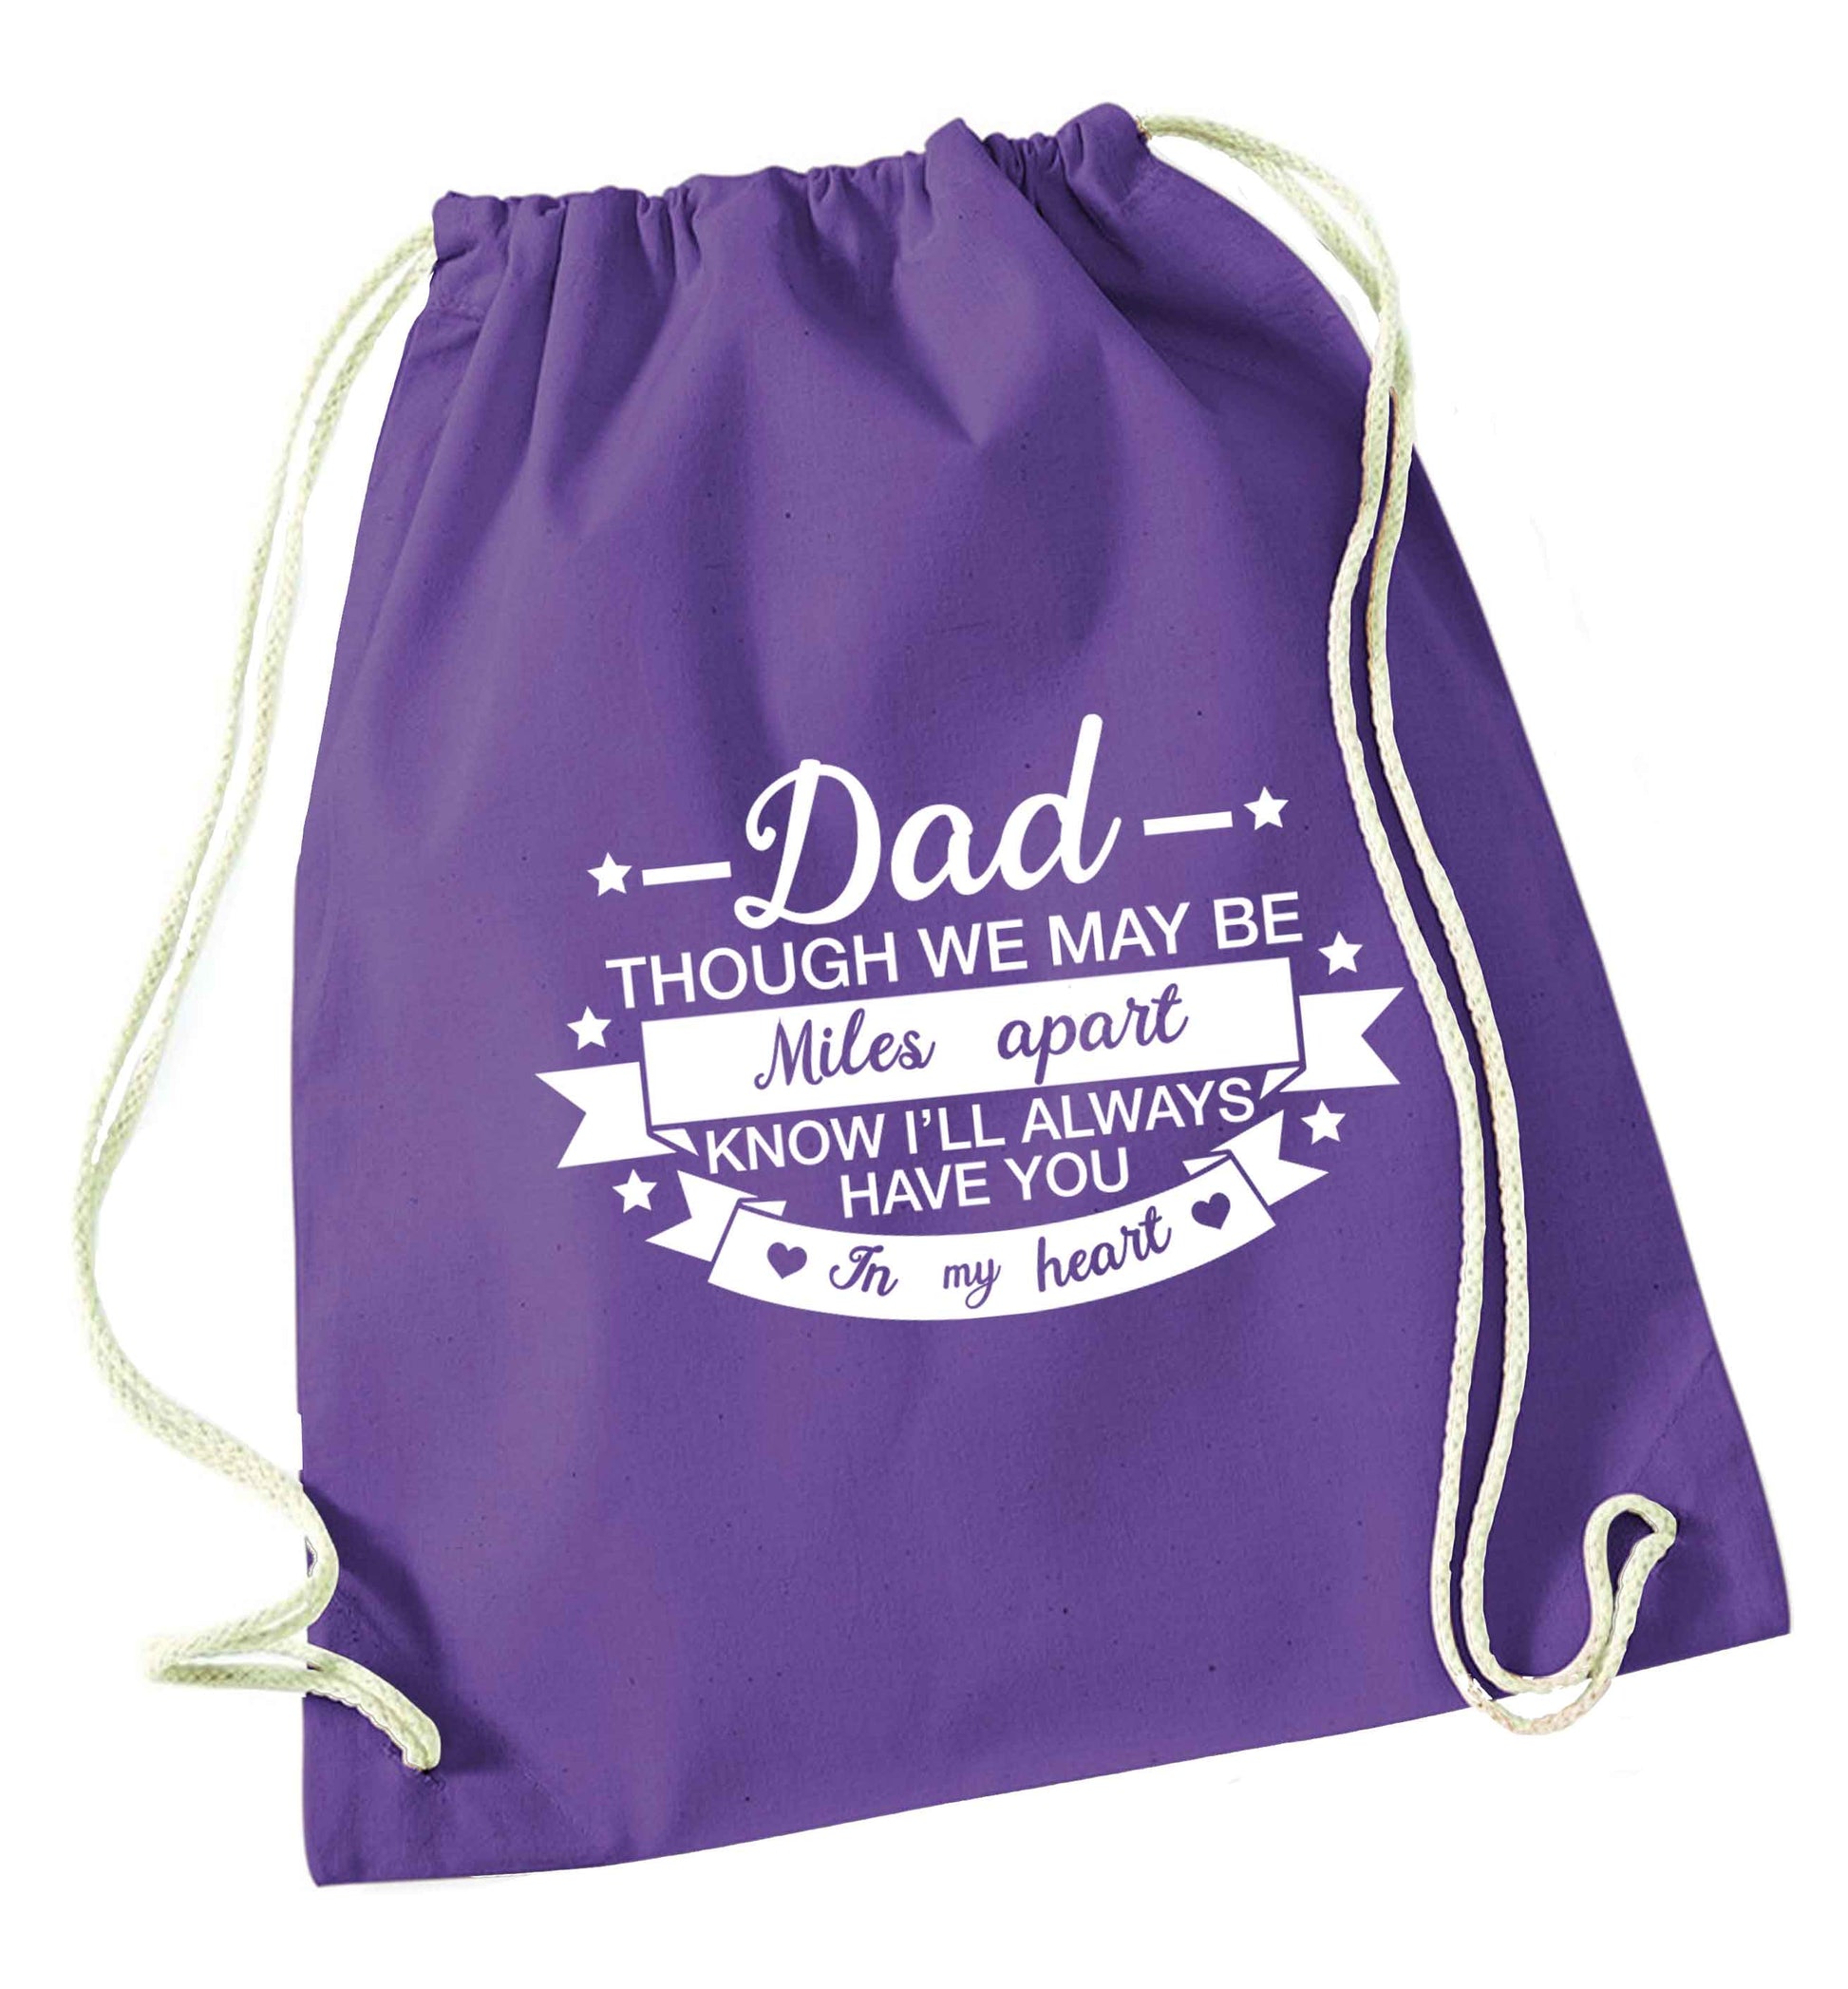 Dad though we are miles apart know I'll always have you in my heart purple drawstring bag